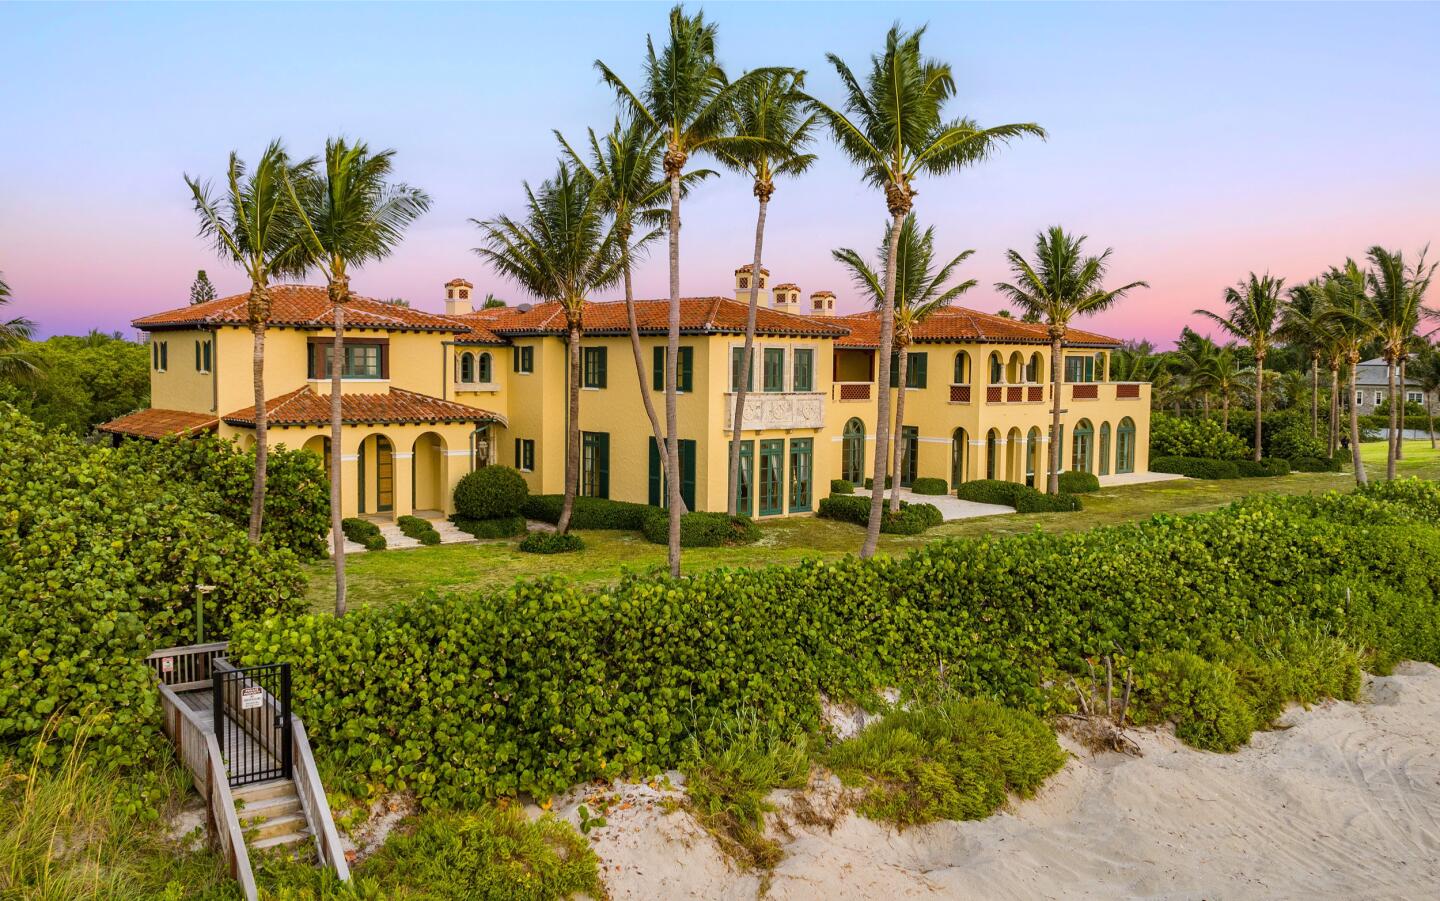 The 6.5-acre spread is the largest oceanfront property current on the market in South Florida.